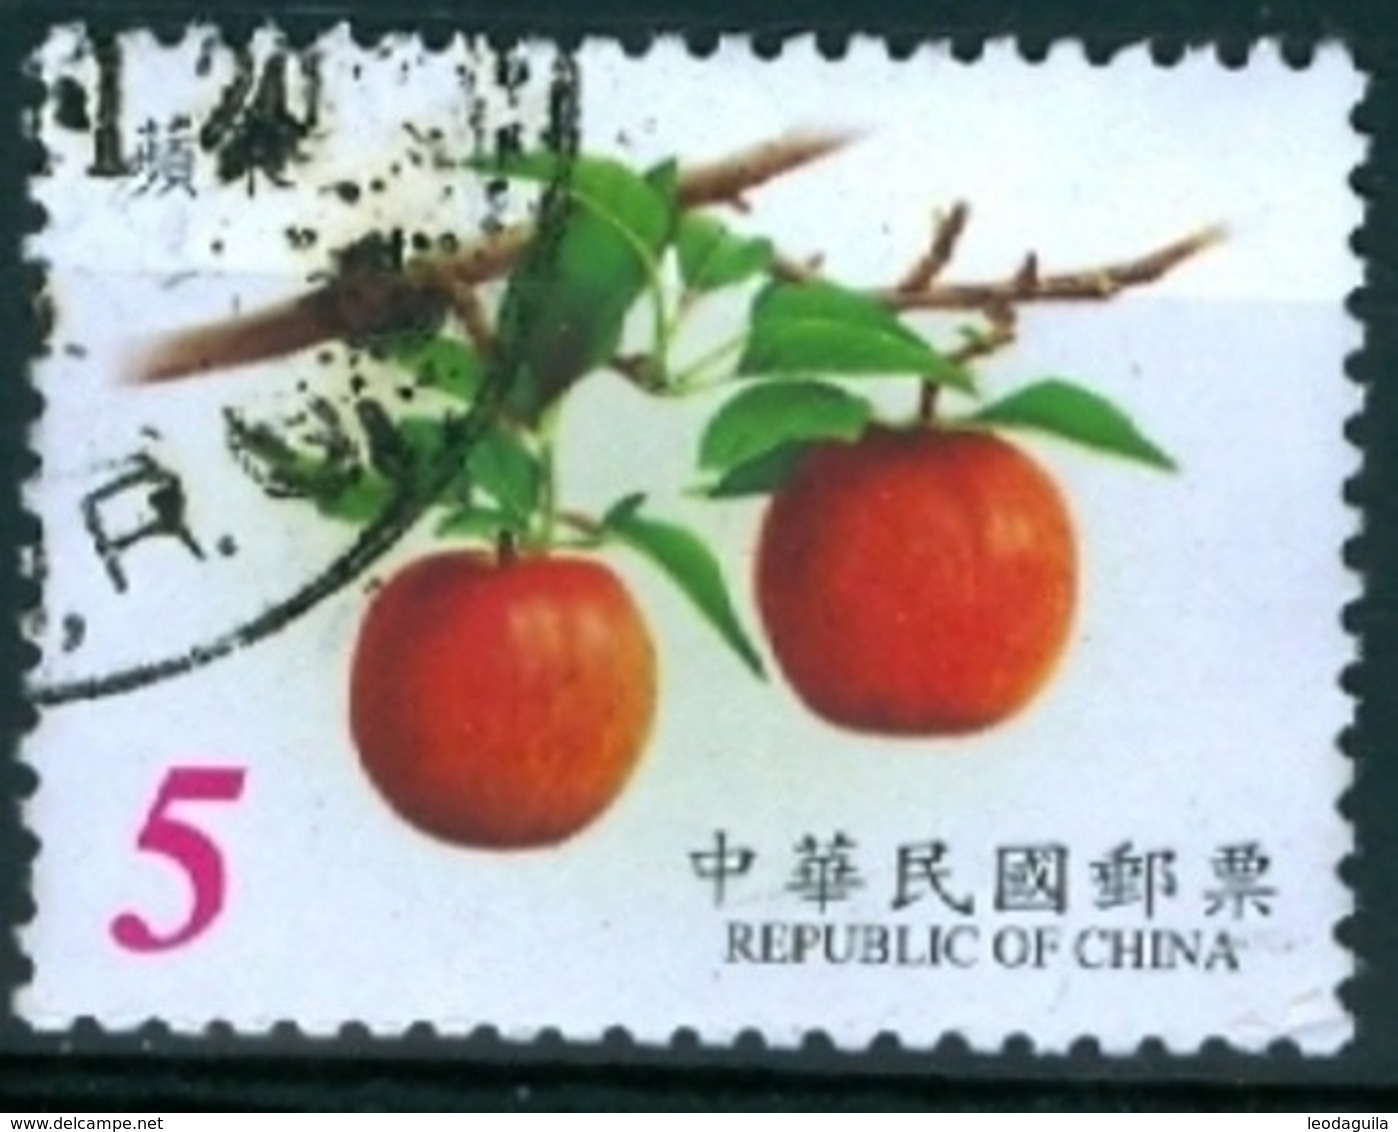 TAIWAN 2016 -  APPLE  -  FRUIT  -  CIRCULATED - Used Stamps